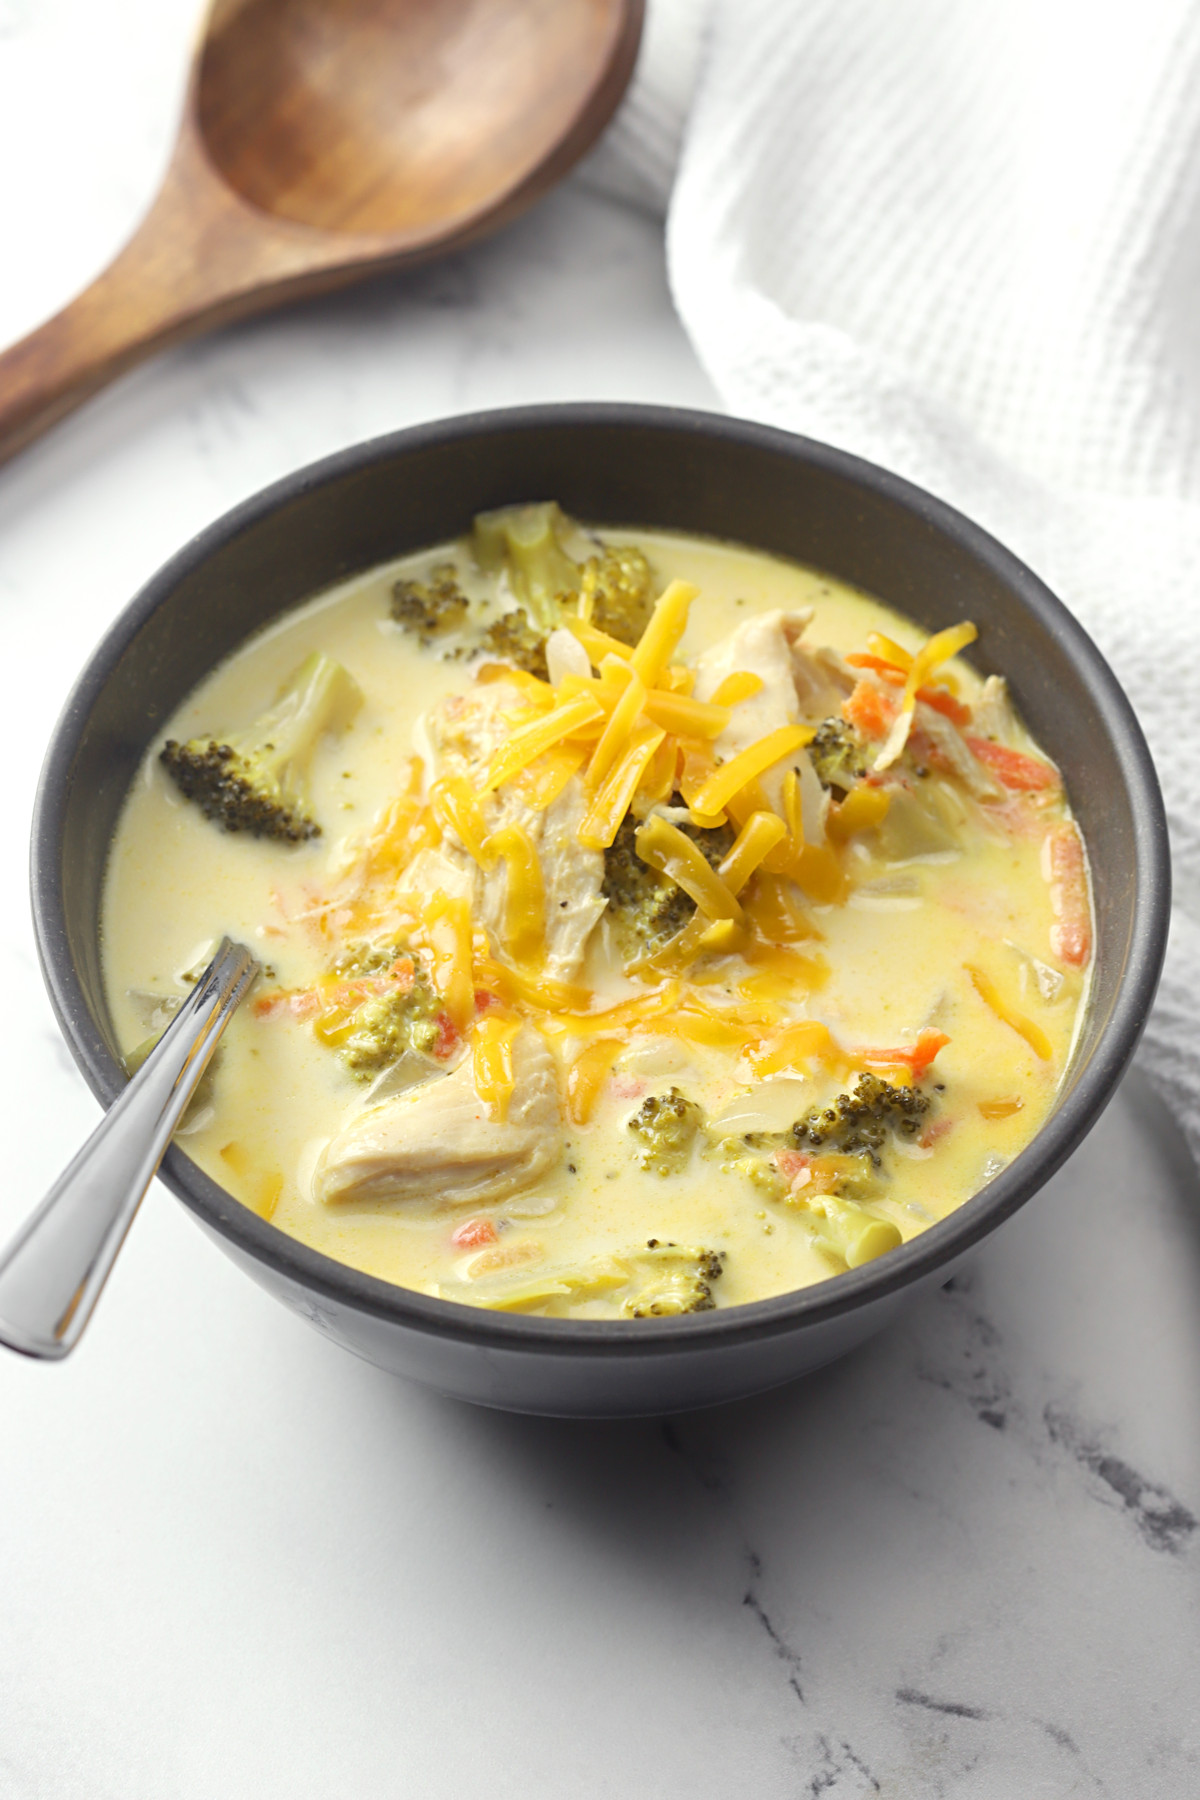 Bowl of chicken broccoli cheese soup with a spoon.